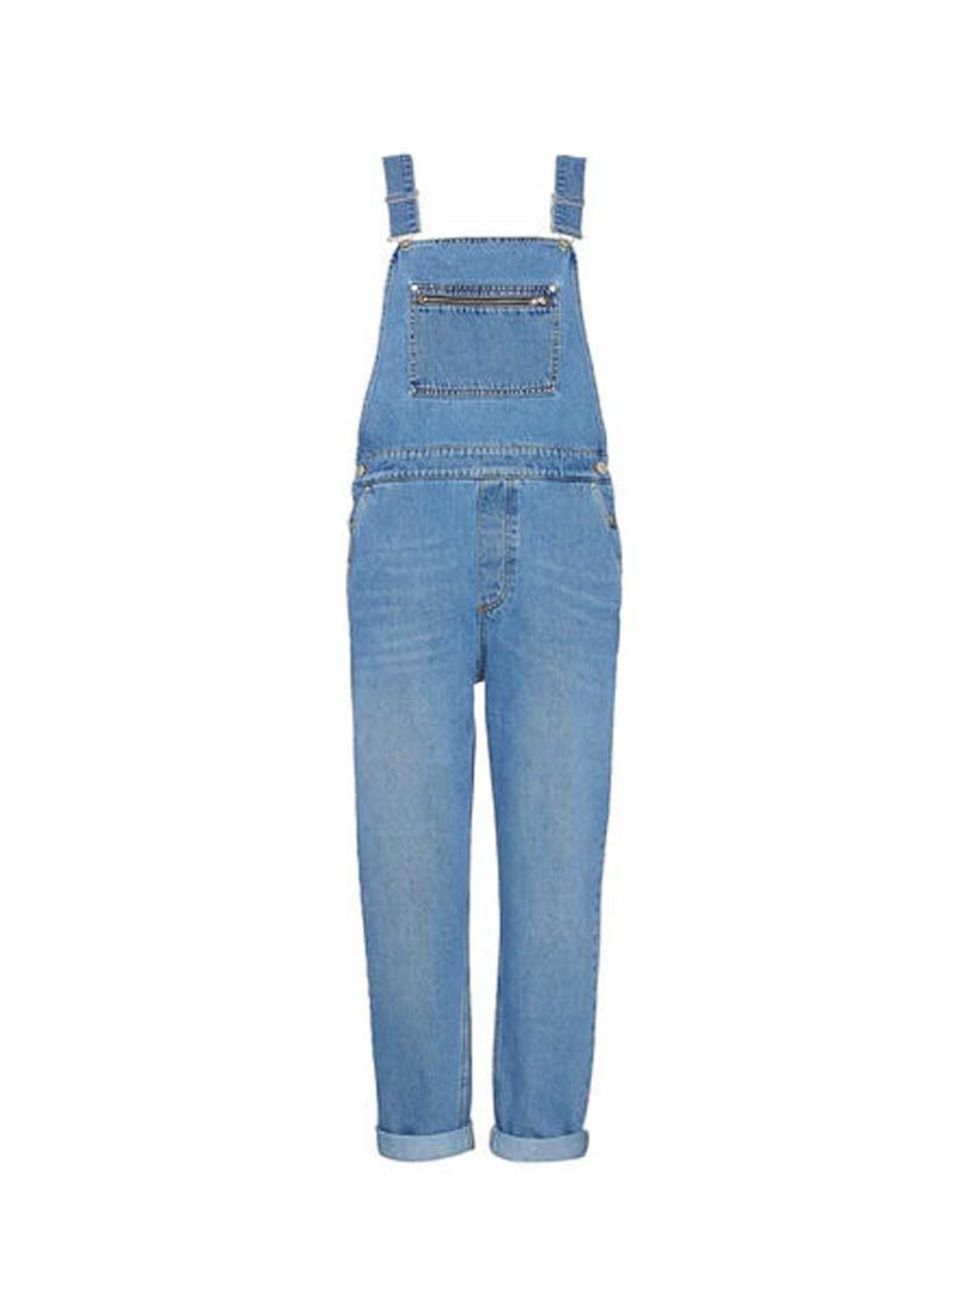 <p>Layer over a printed silk shirt, or this season's fine-knit rollneck.</p>

<p><a href="http://www.whistles.com/women/clothing/jeans/slim-denim-dungarees-20093.html?dwvar_slim-denim-dungarees-20093_color=Denim#" target="_blank">Whistles</a> dungarees, £